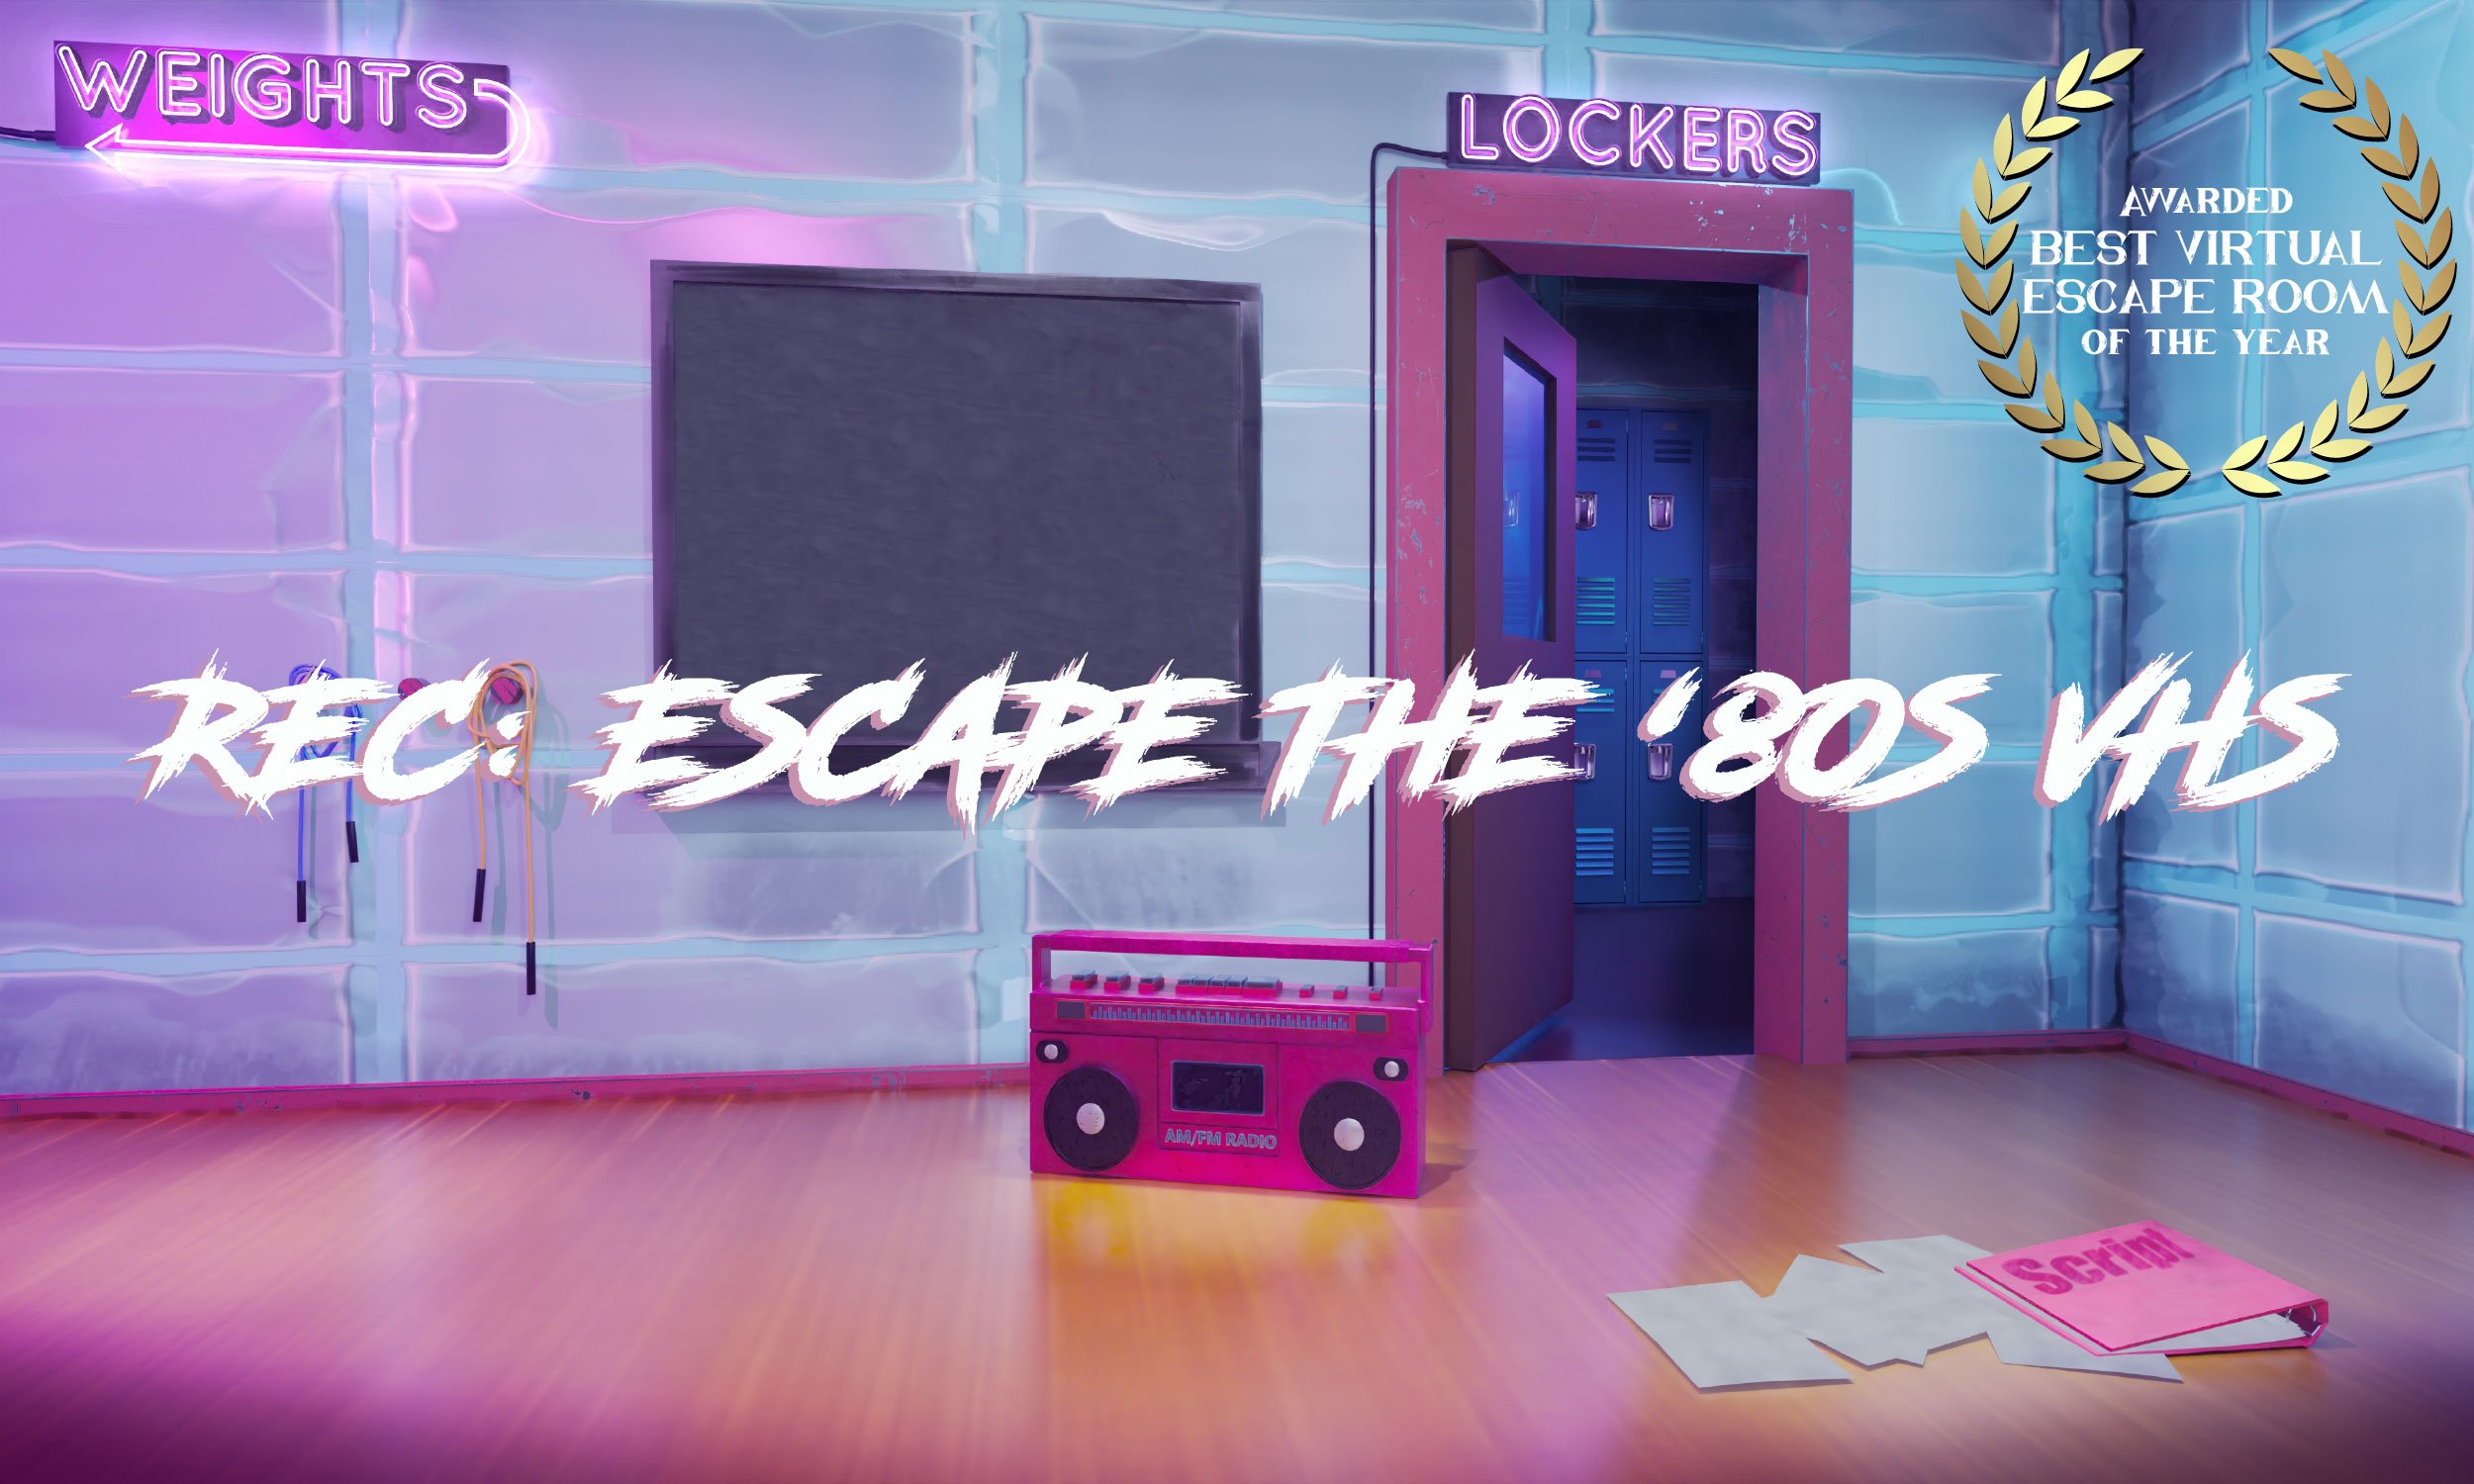 Escape Room Challenge: Does Your Team Have What it Takes?